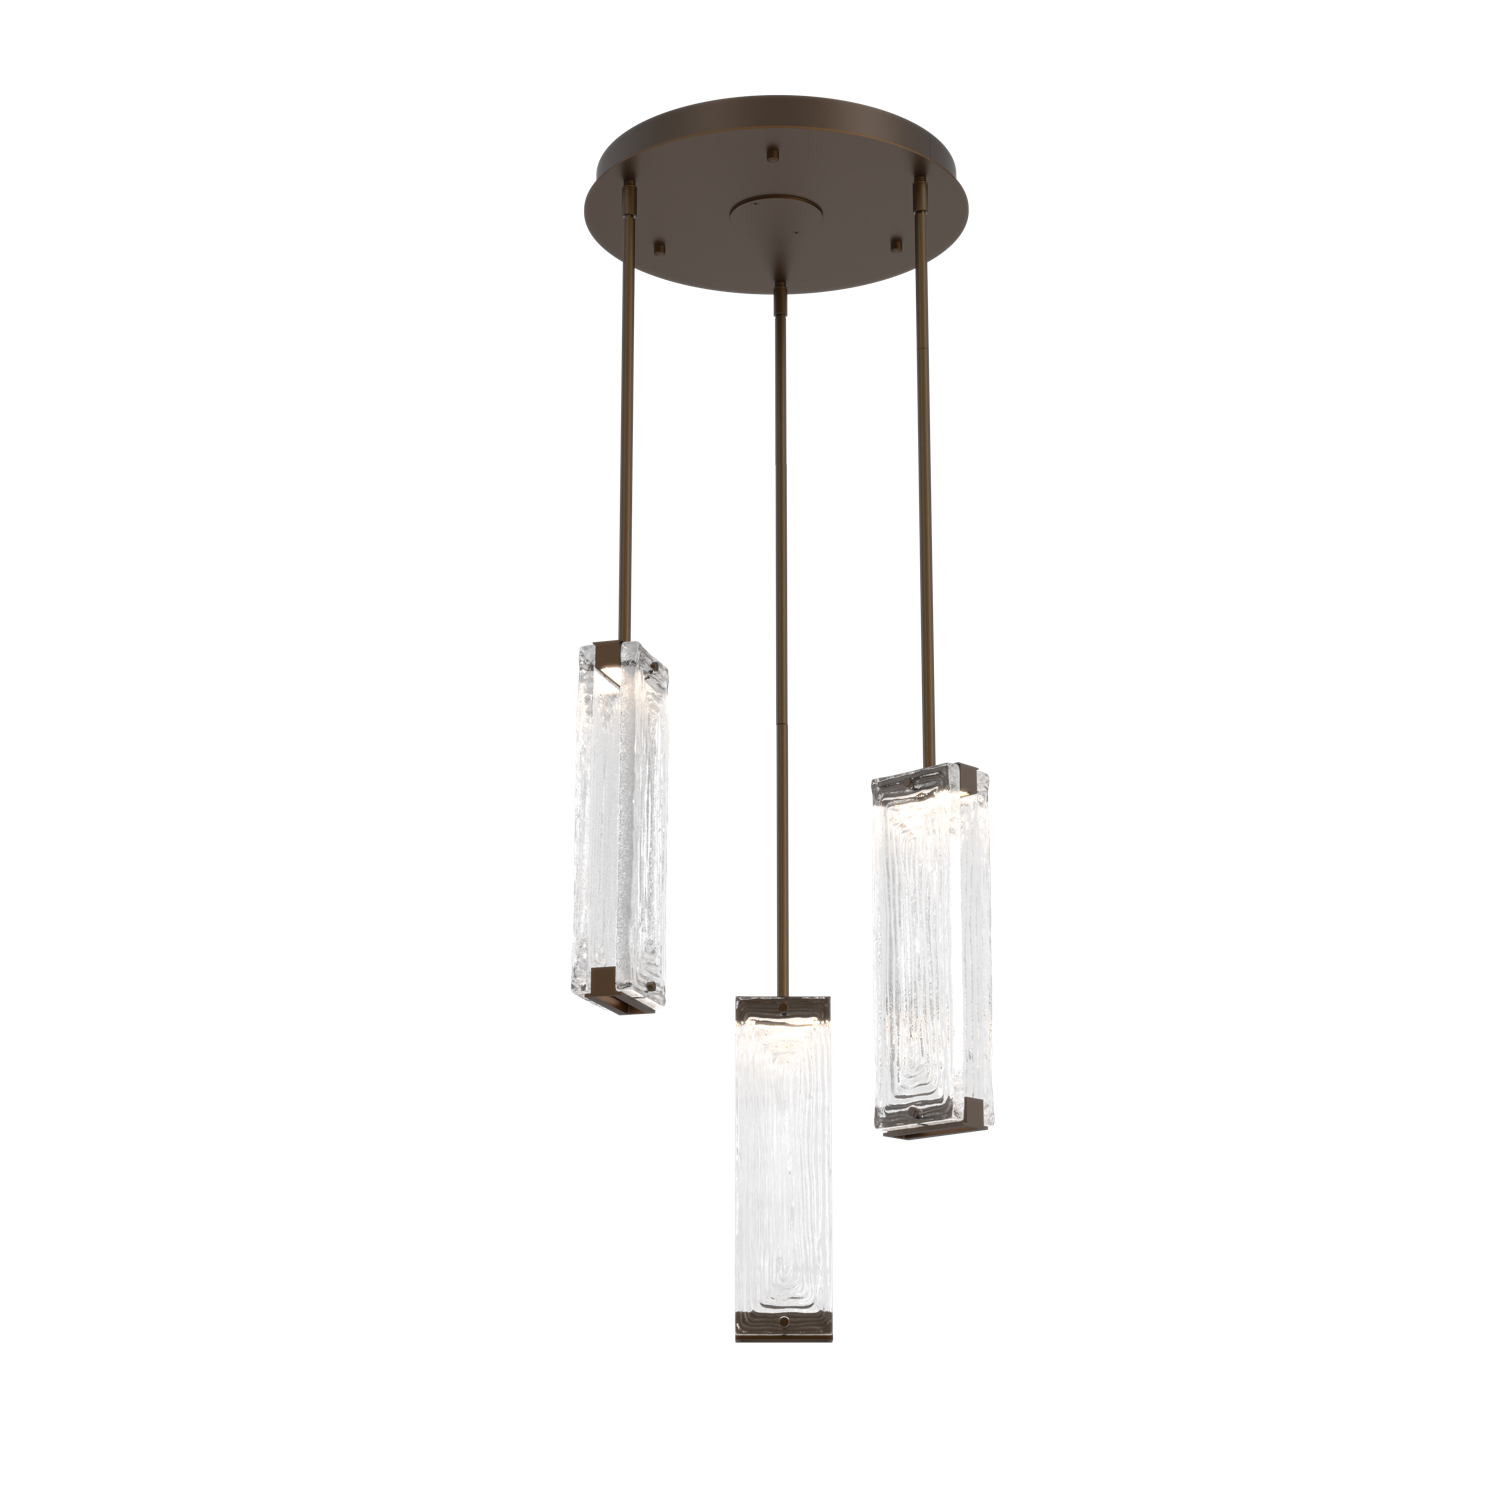 CHB0090-03-FB-TL-Hammerton-Studio-Tabulo-3-light-multi-pendant-chandelier-with-flat-bronze-finish-and-clear-linea-cast-glass-shade-and-LED-lamping